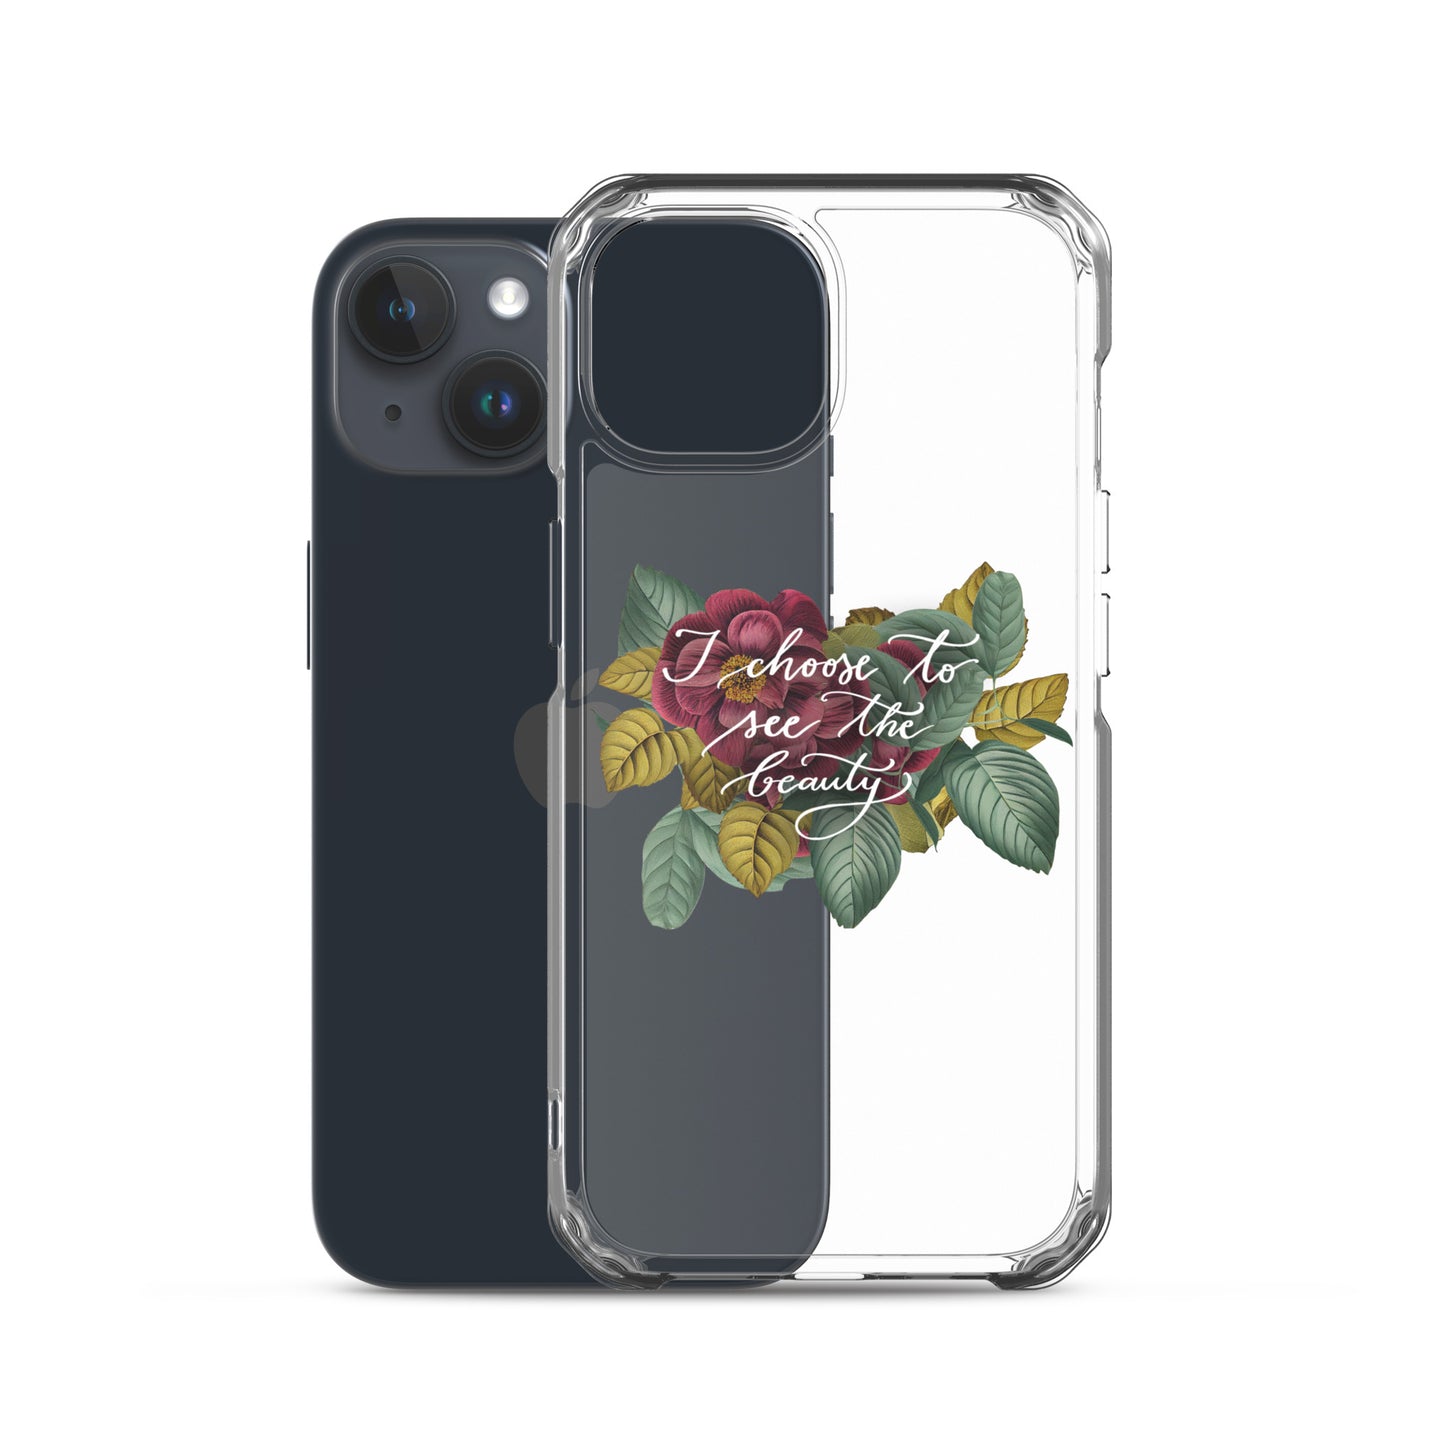 Clear Case for iPhone® "I choose to see the beauty - vintage flowers"